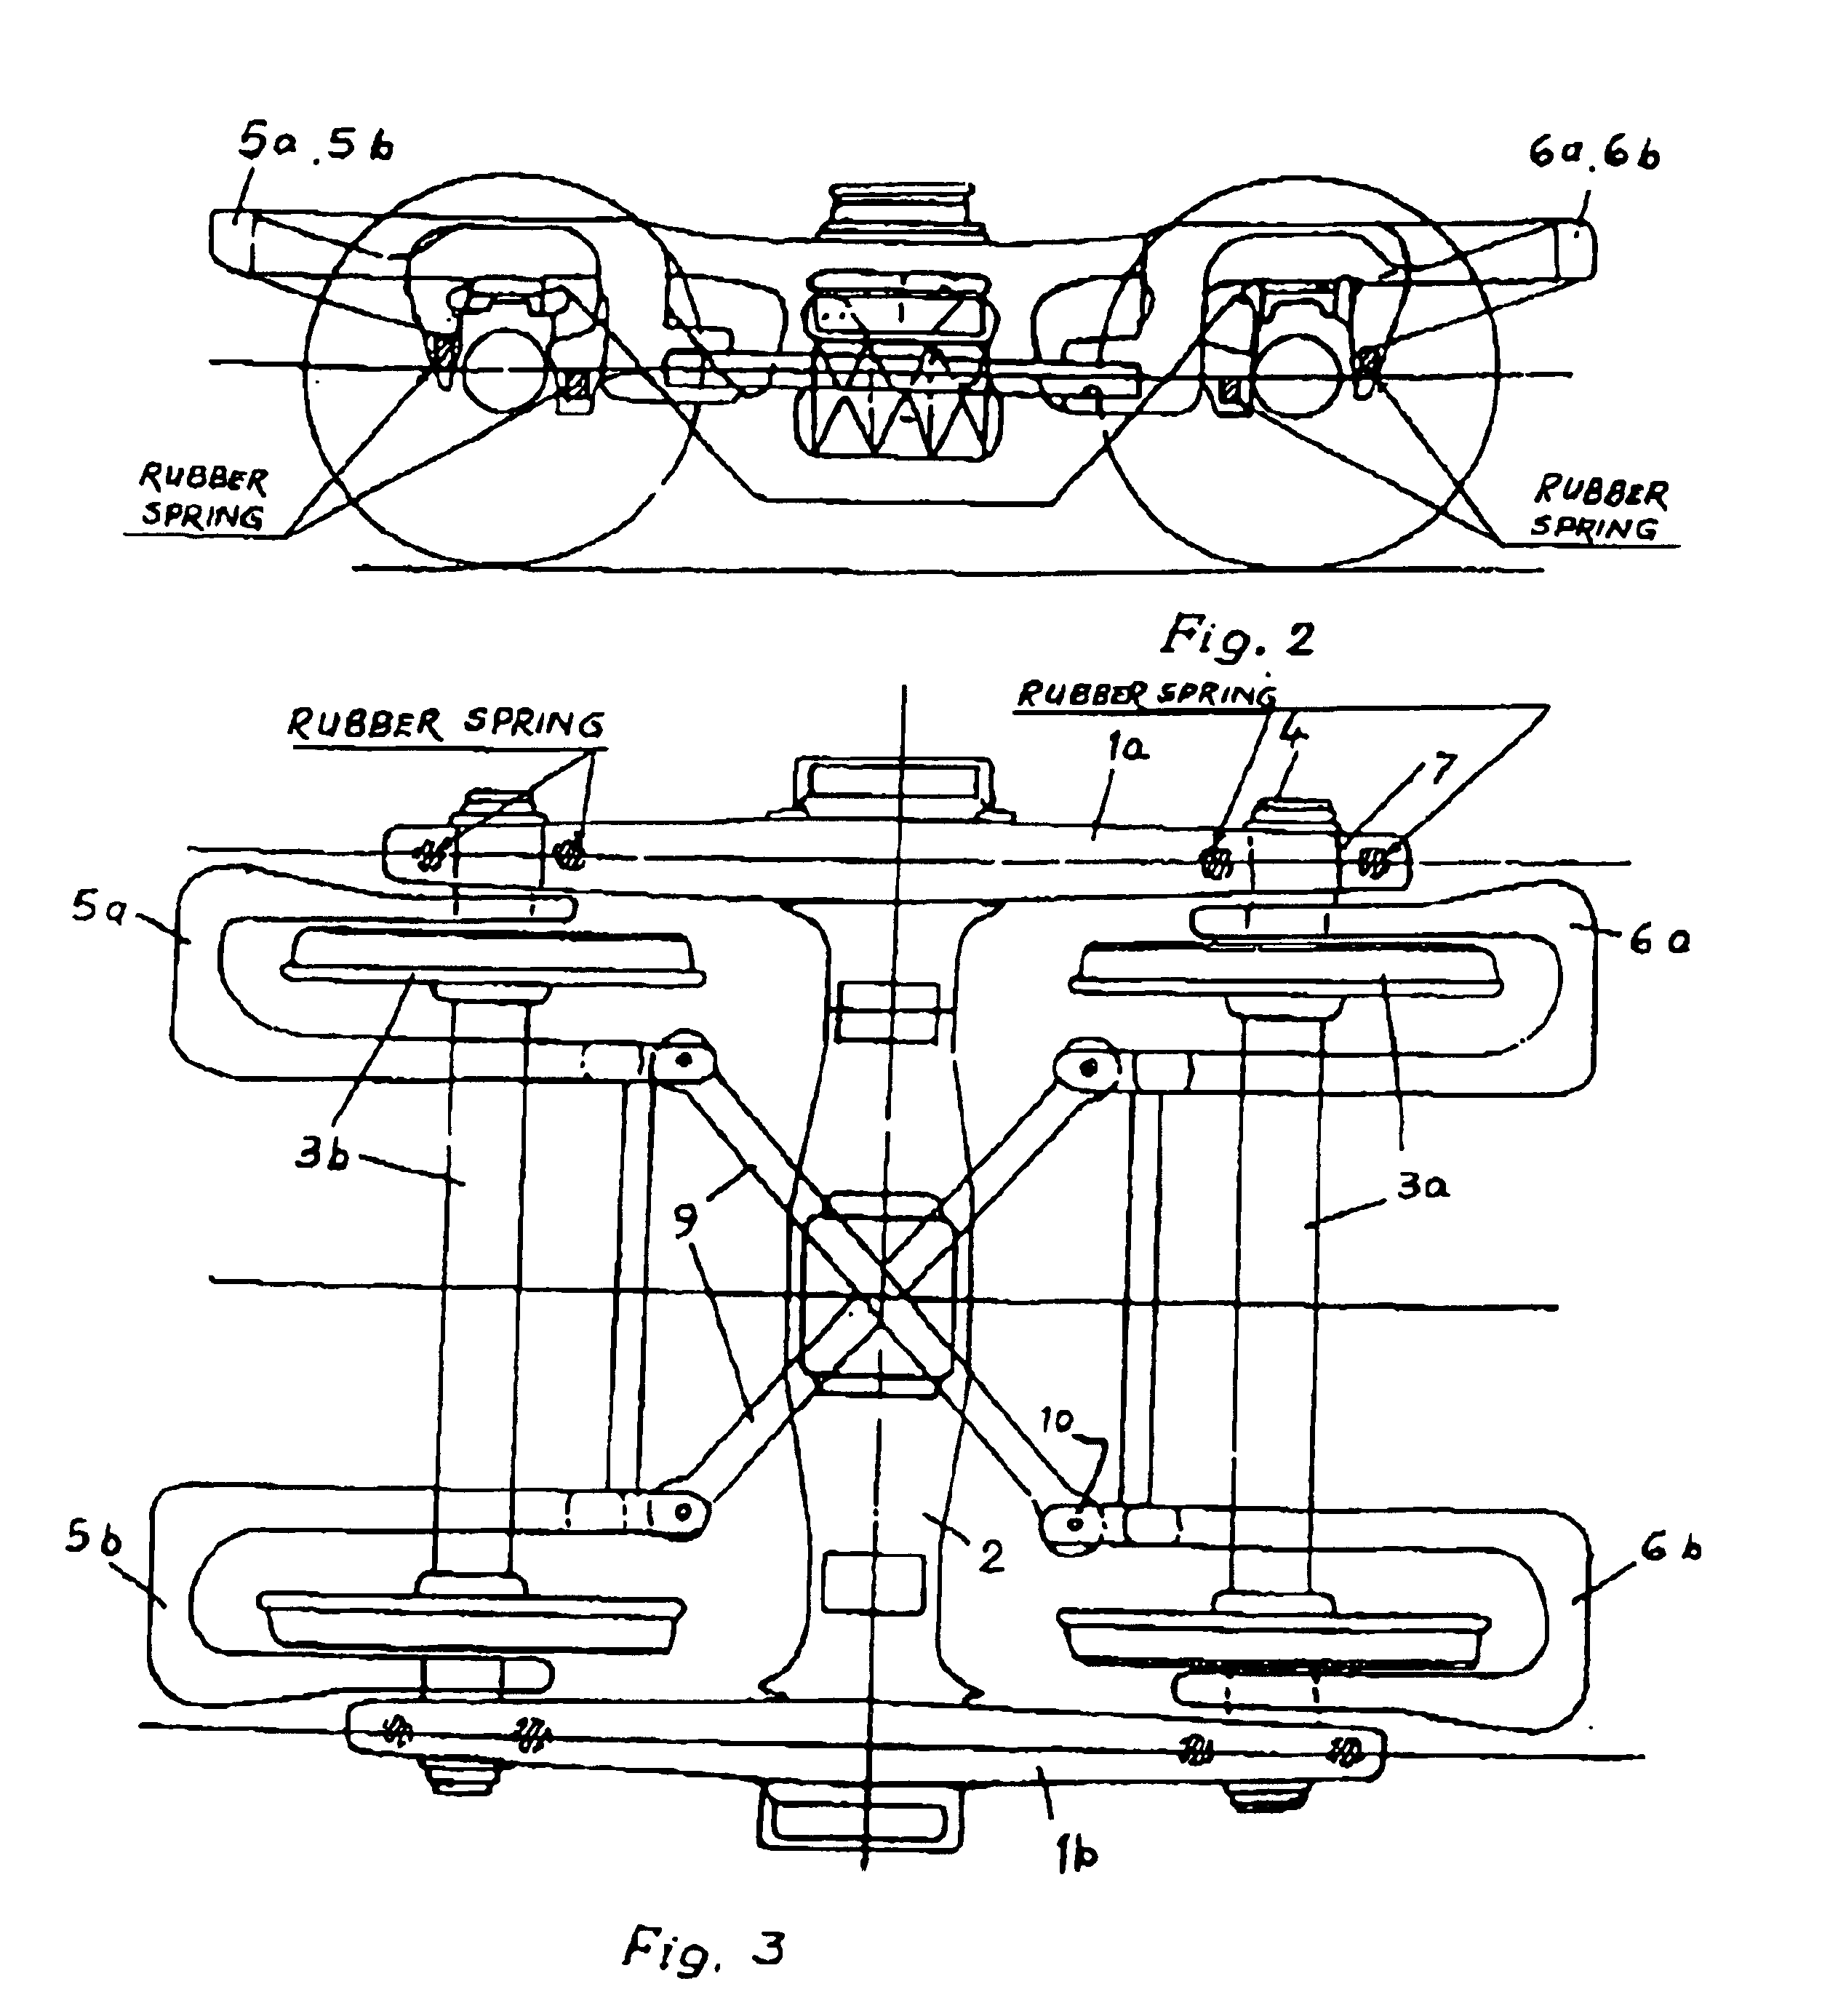 Control arm system for steering bogie wheels and axles